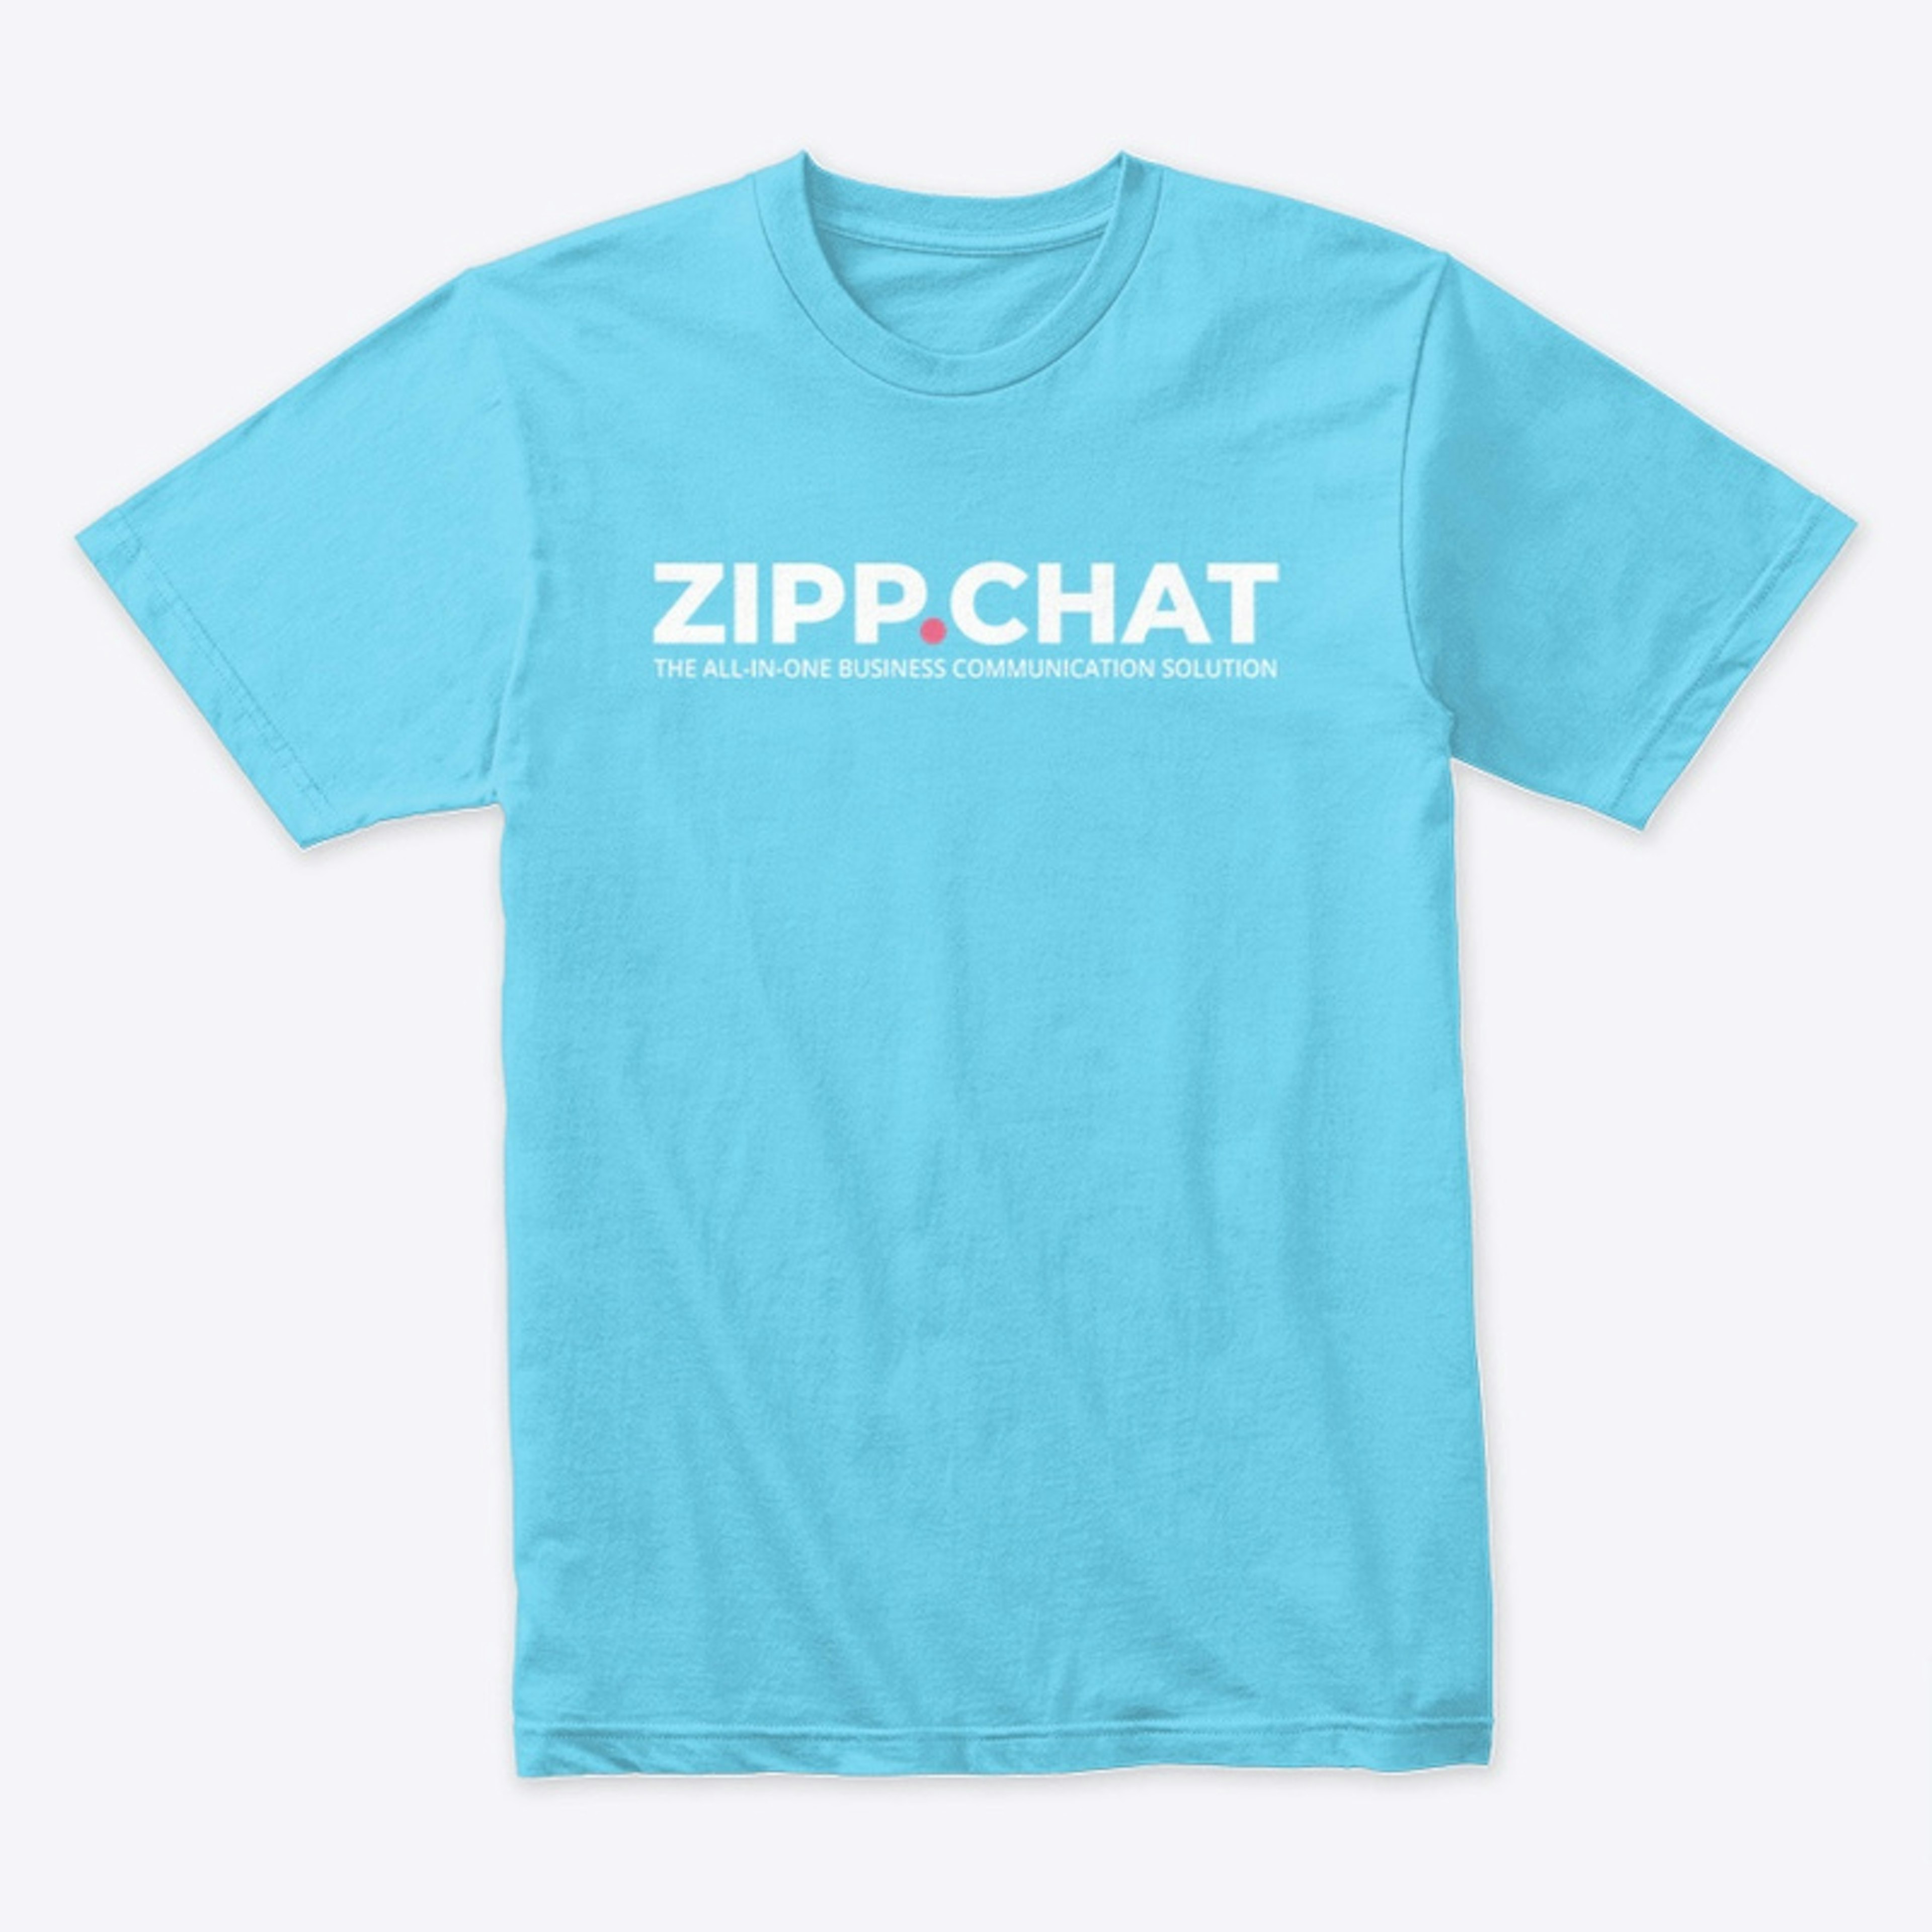 zipp.chat - The All-in-One